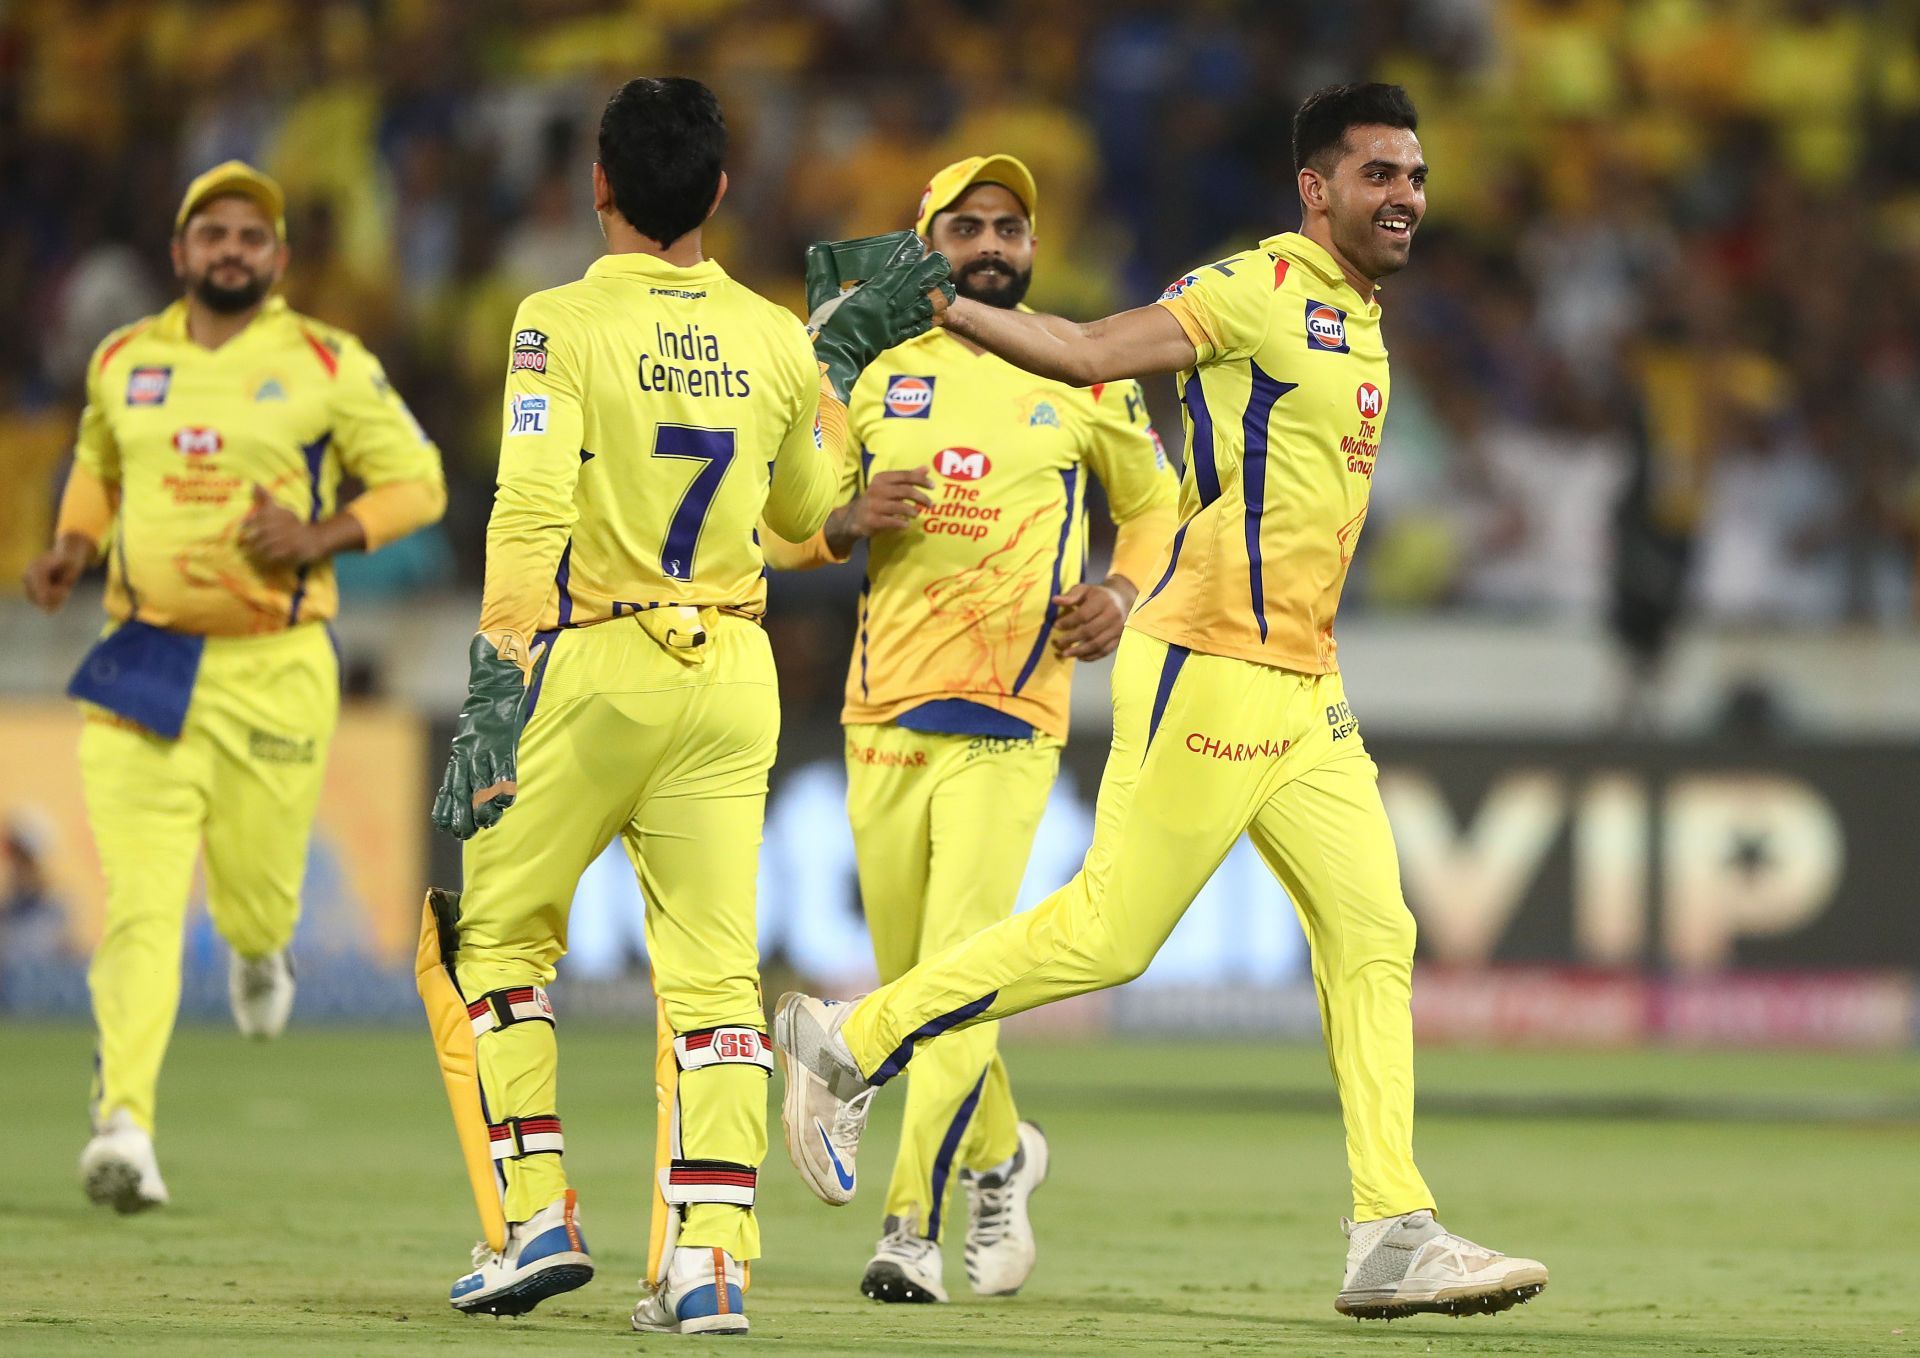 Chennai Super Kings will want to have a better bidding time at the IPL 2022 Auction.